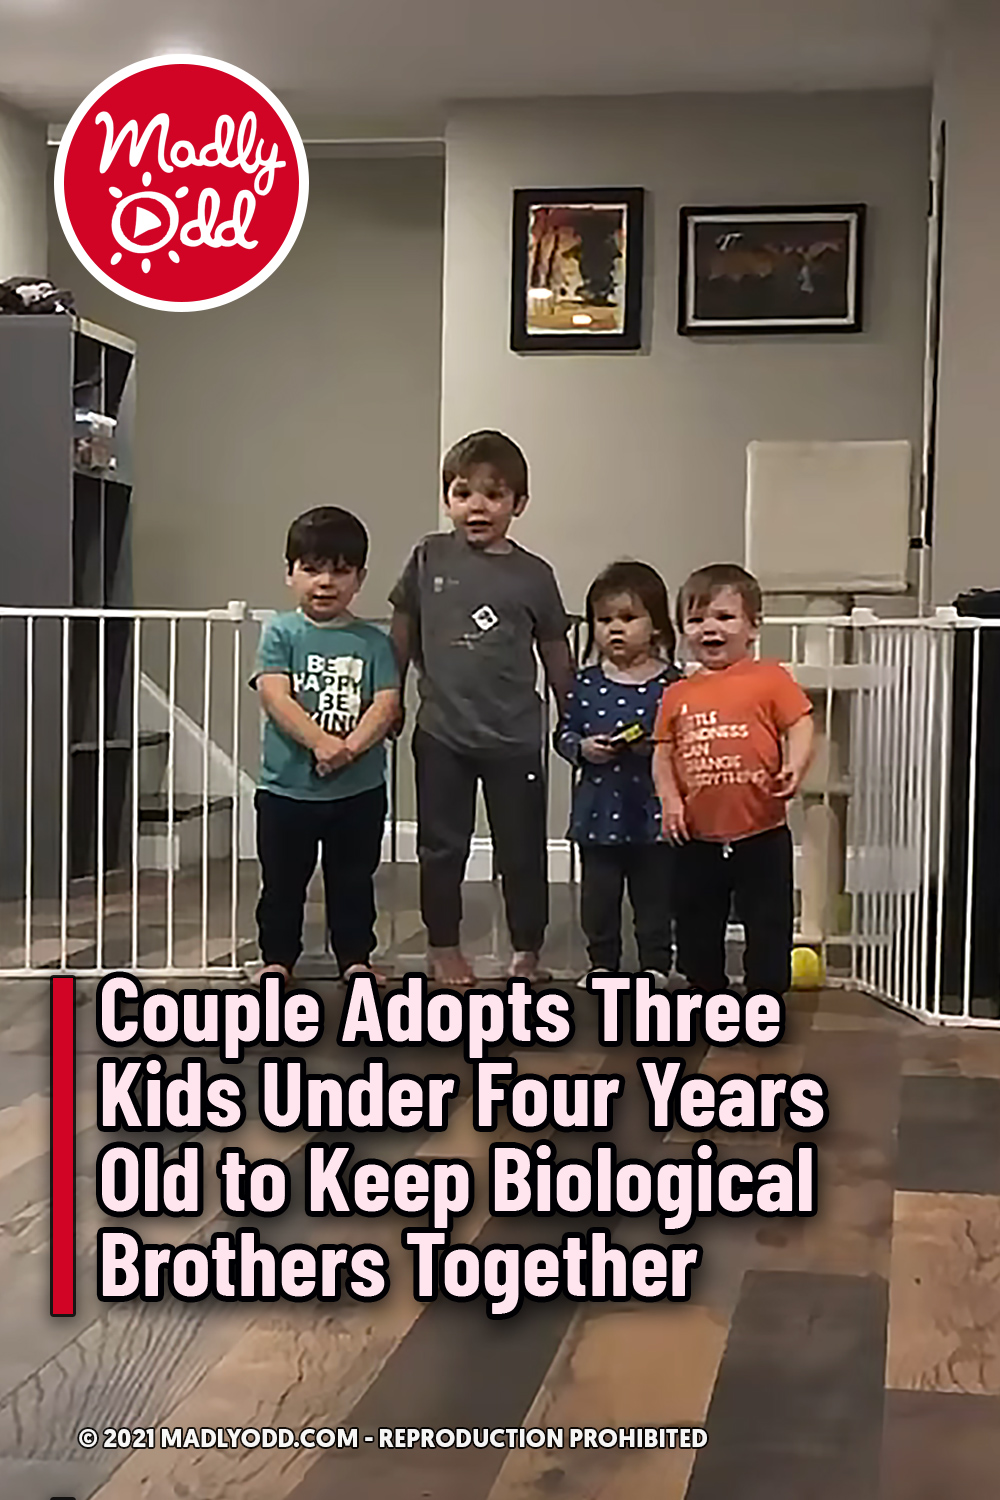 Couple Adopts Three Kids Under Four Years Old to Keep Biological Brothers Together